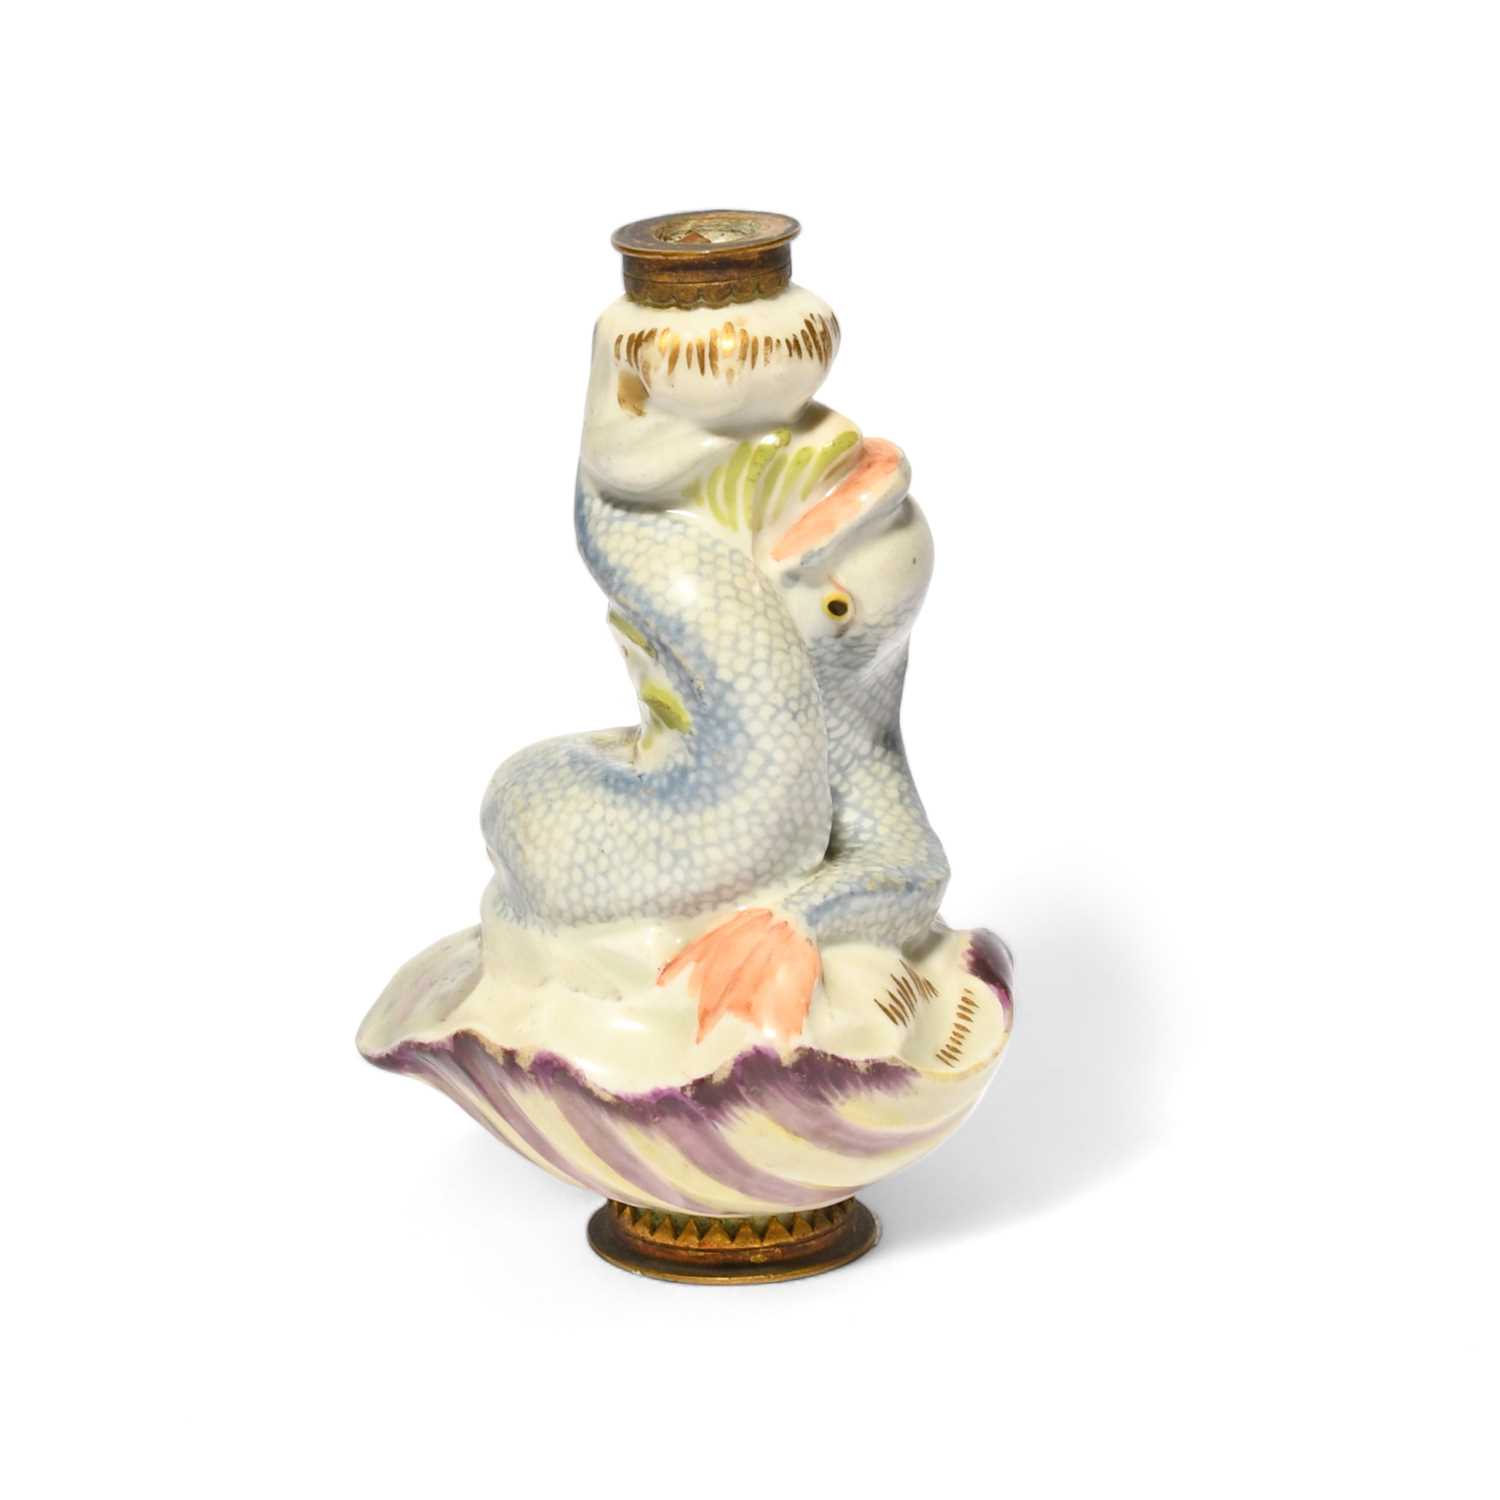 An English porcelain scent bottle, probably late 18th century, modelled in the Chelsea manner with